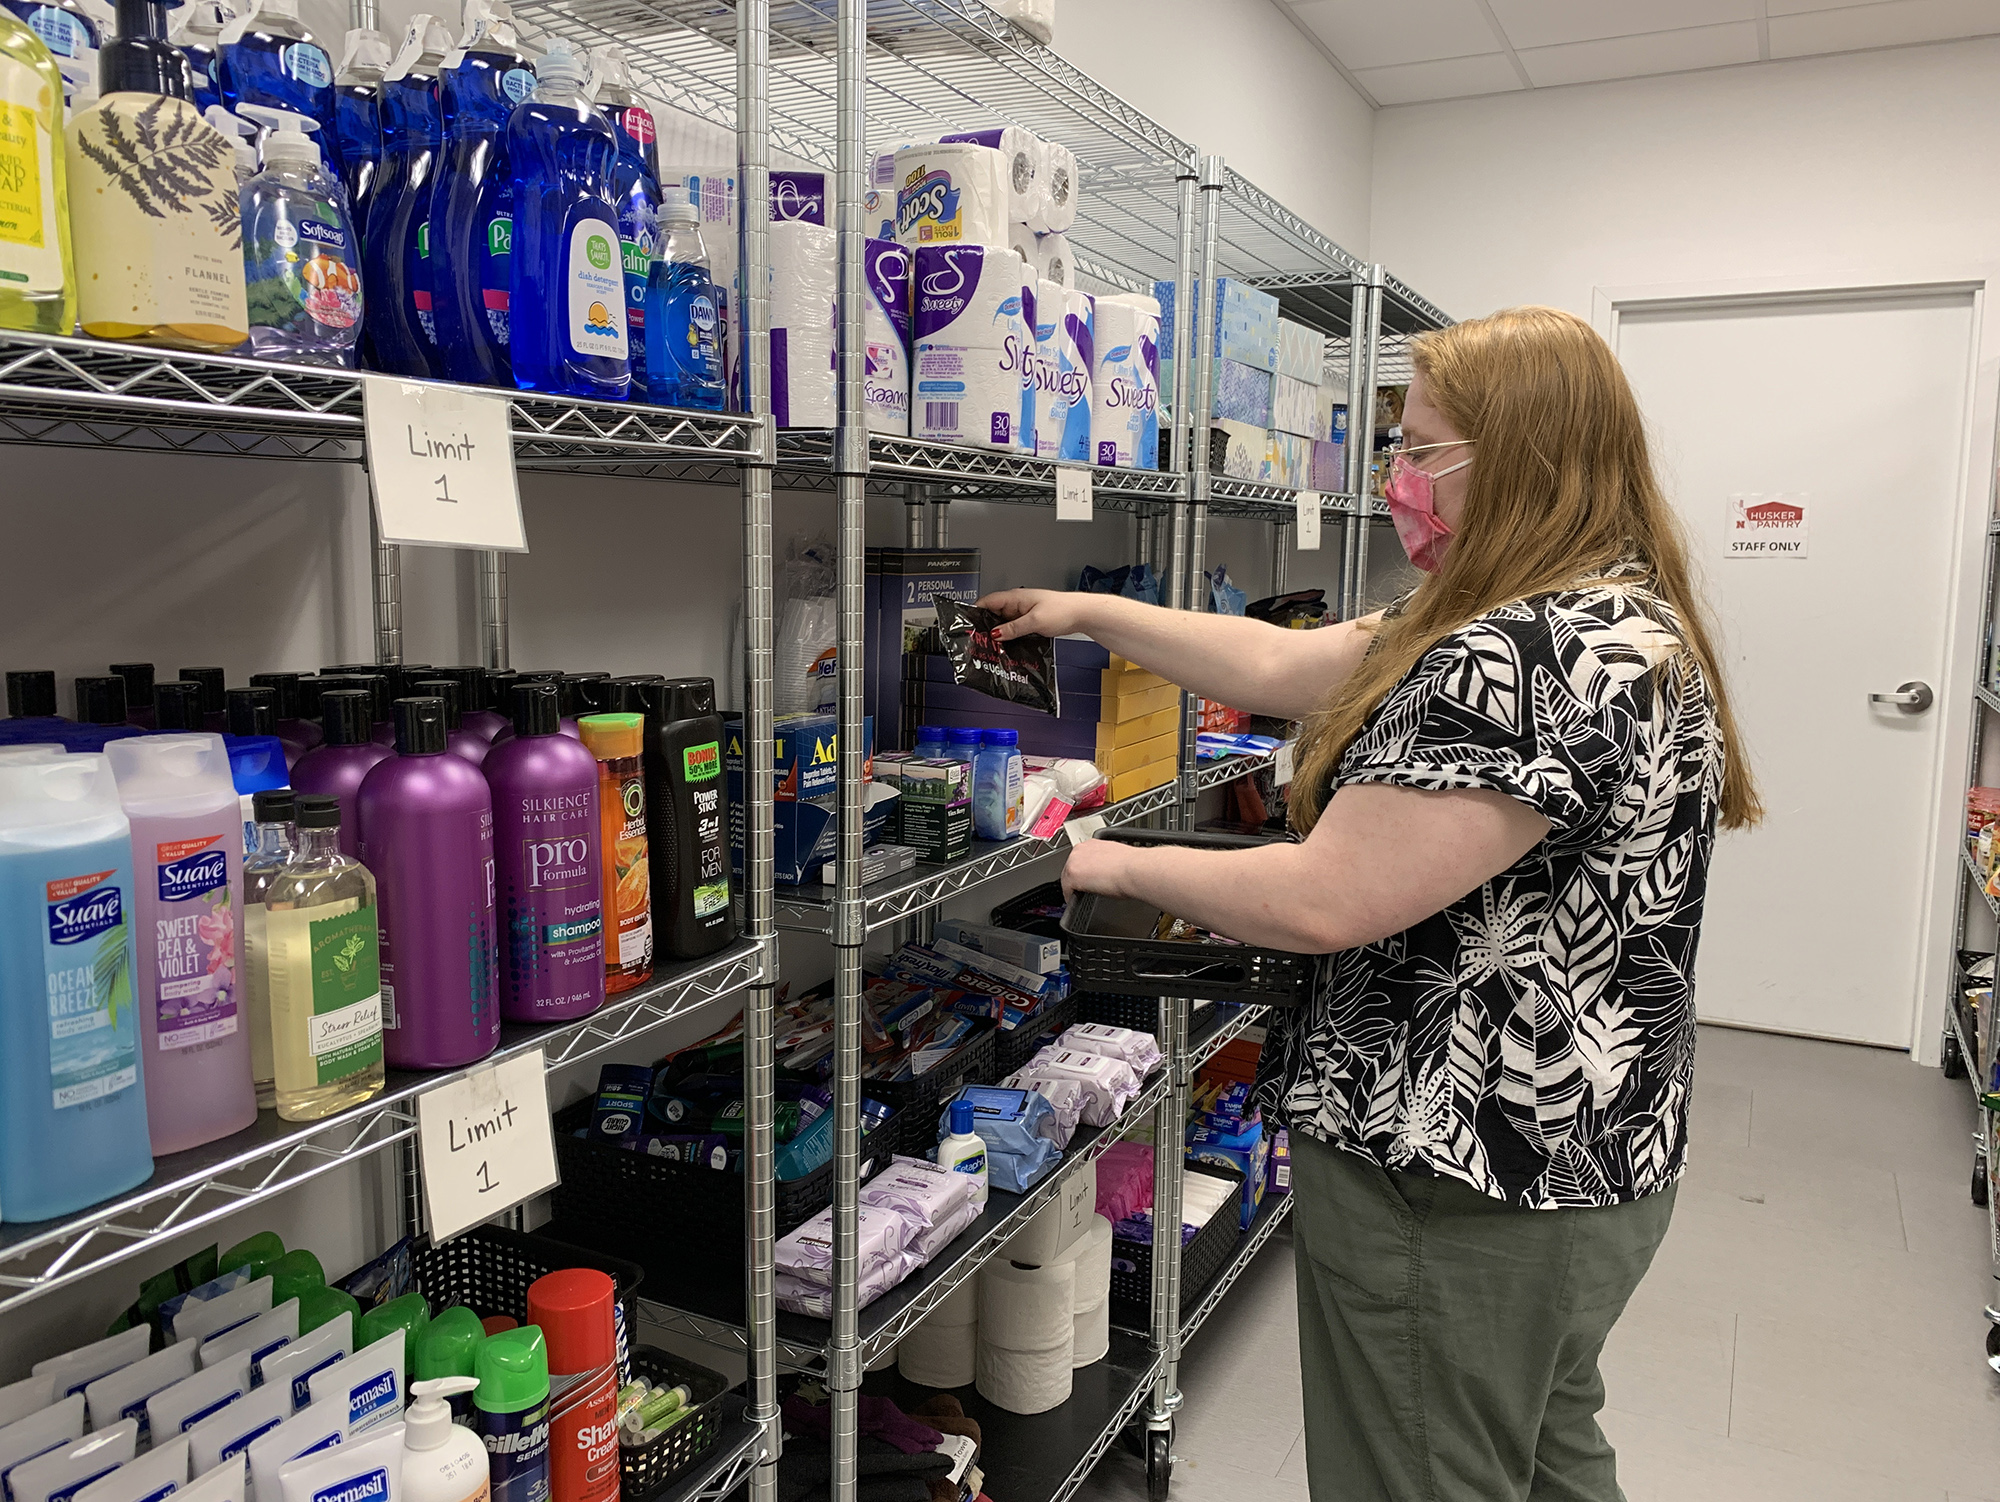 Graduate assistant Katie Peterson restocks the product shelves on the first day that in-person visits resumed at Husker Pantry. May 12, 2021. [Christopher Dulak | Student Affairs]